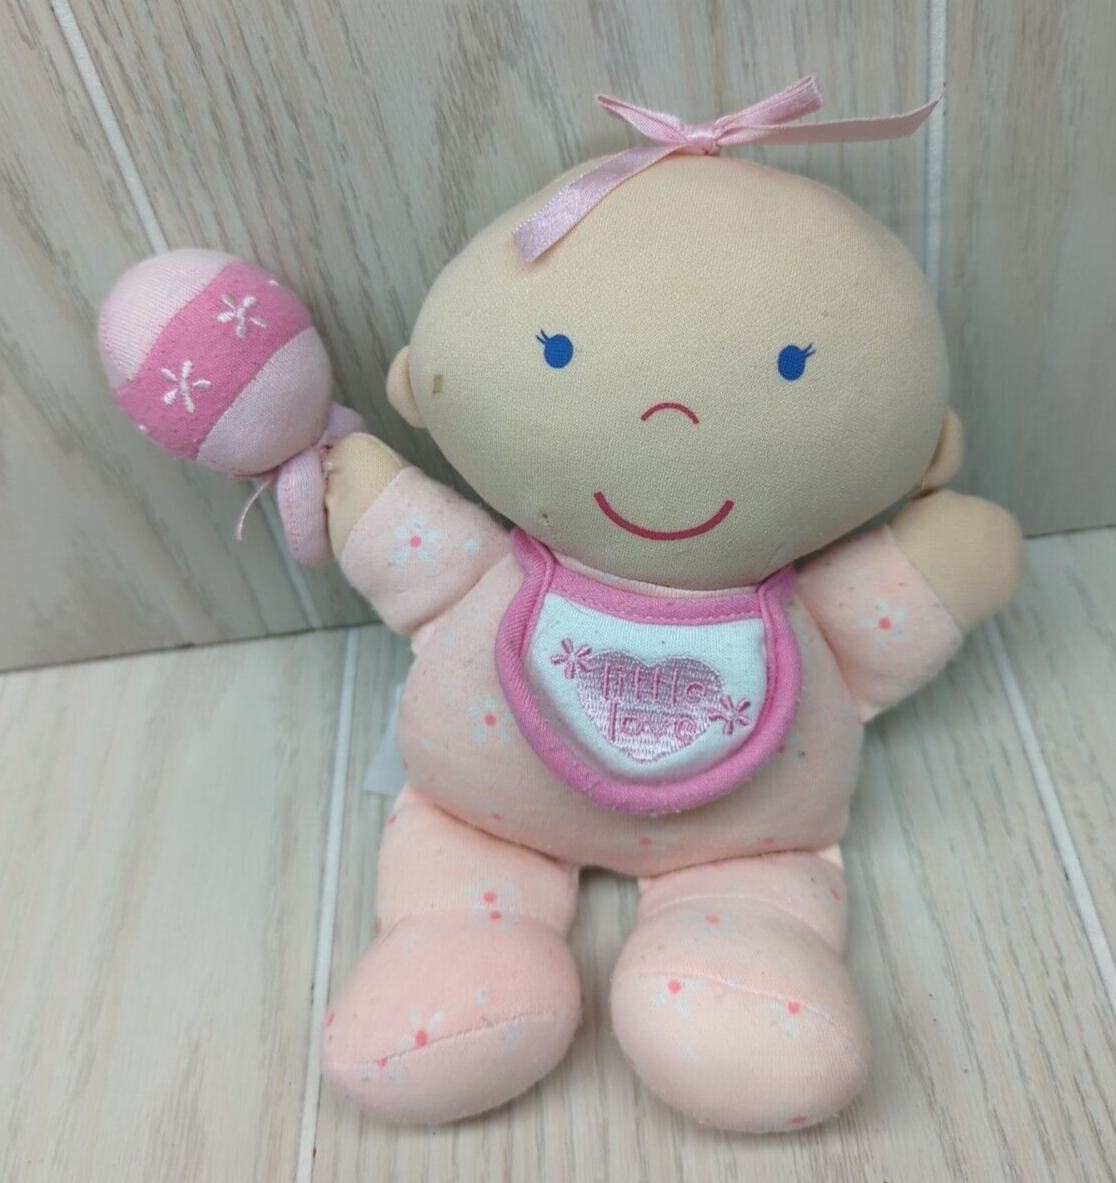 Toys R Us Especially for Baby Plush soft baby doll pink white flowers bib rattle - $24.74